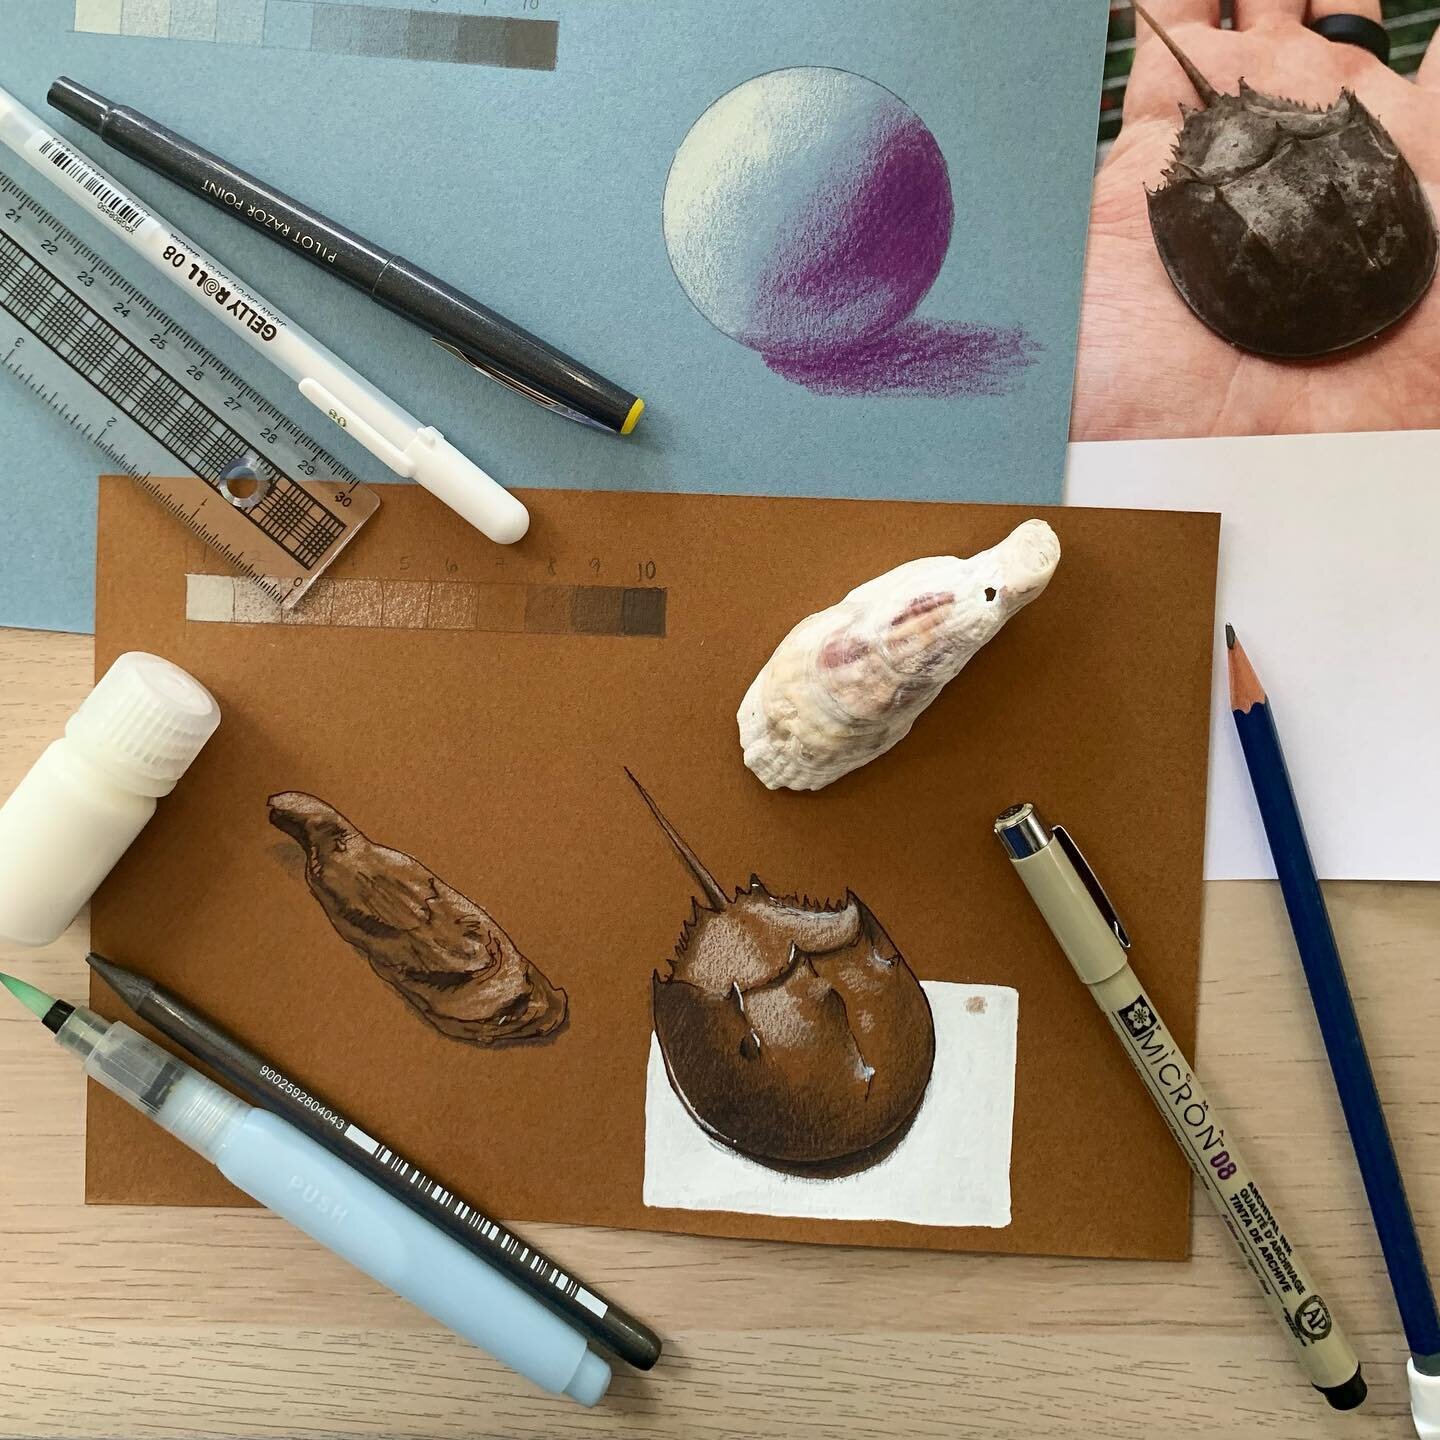 The #WildWonderConference this year has been so wonderful, so incredibly rich and inspiring. I was so nervous for my &ldquo;Drawing on Toned Paper for Beginners&rdquo; lesson this morning, especially because it was live on Zoom with over 400 viewers(